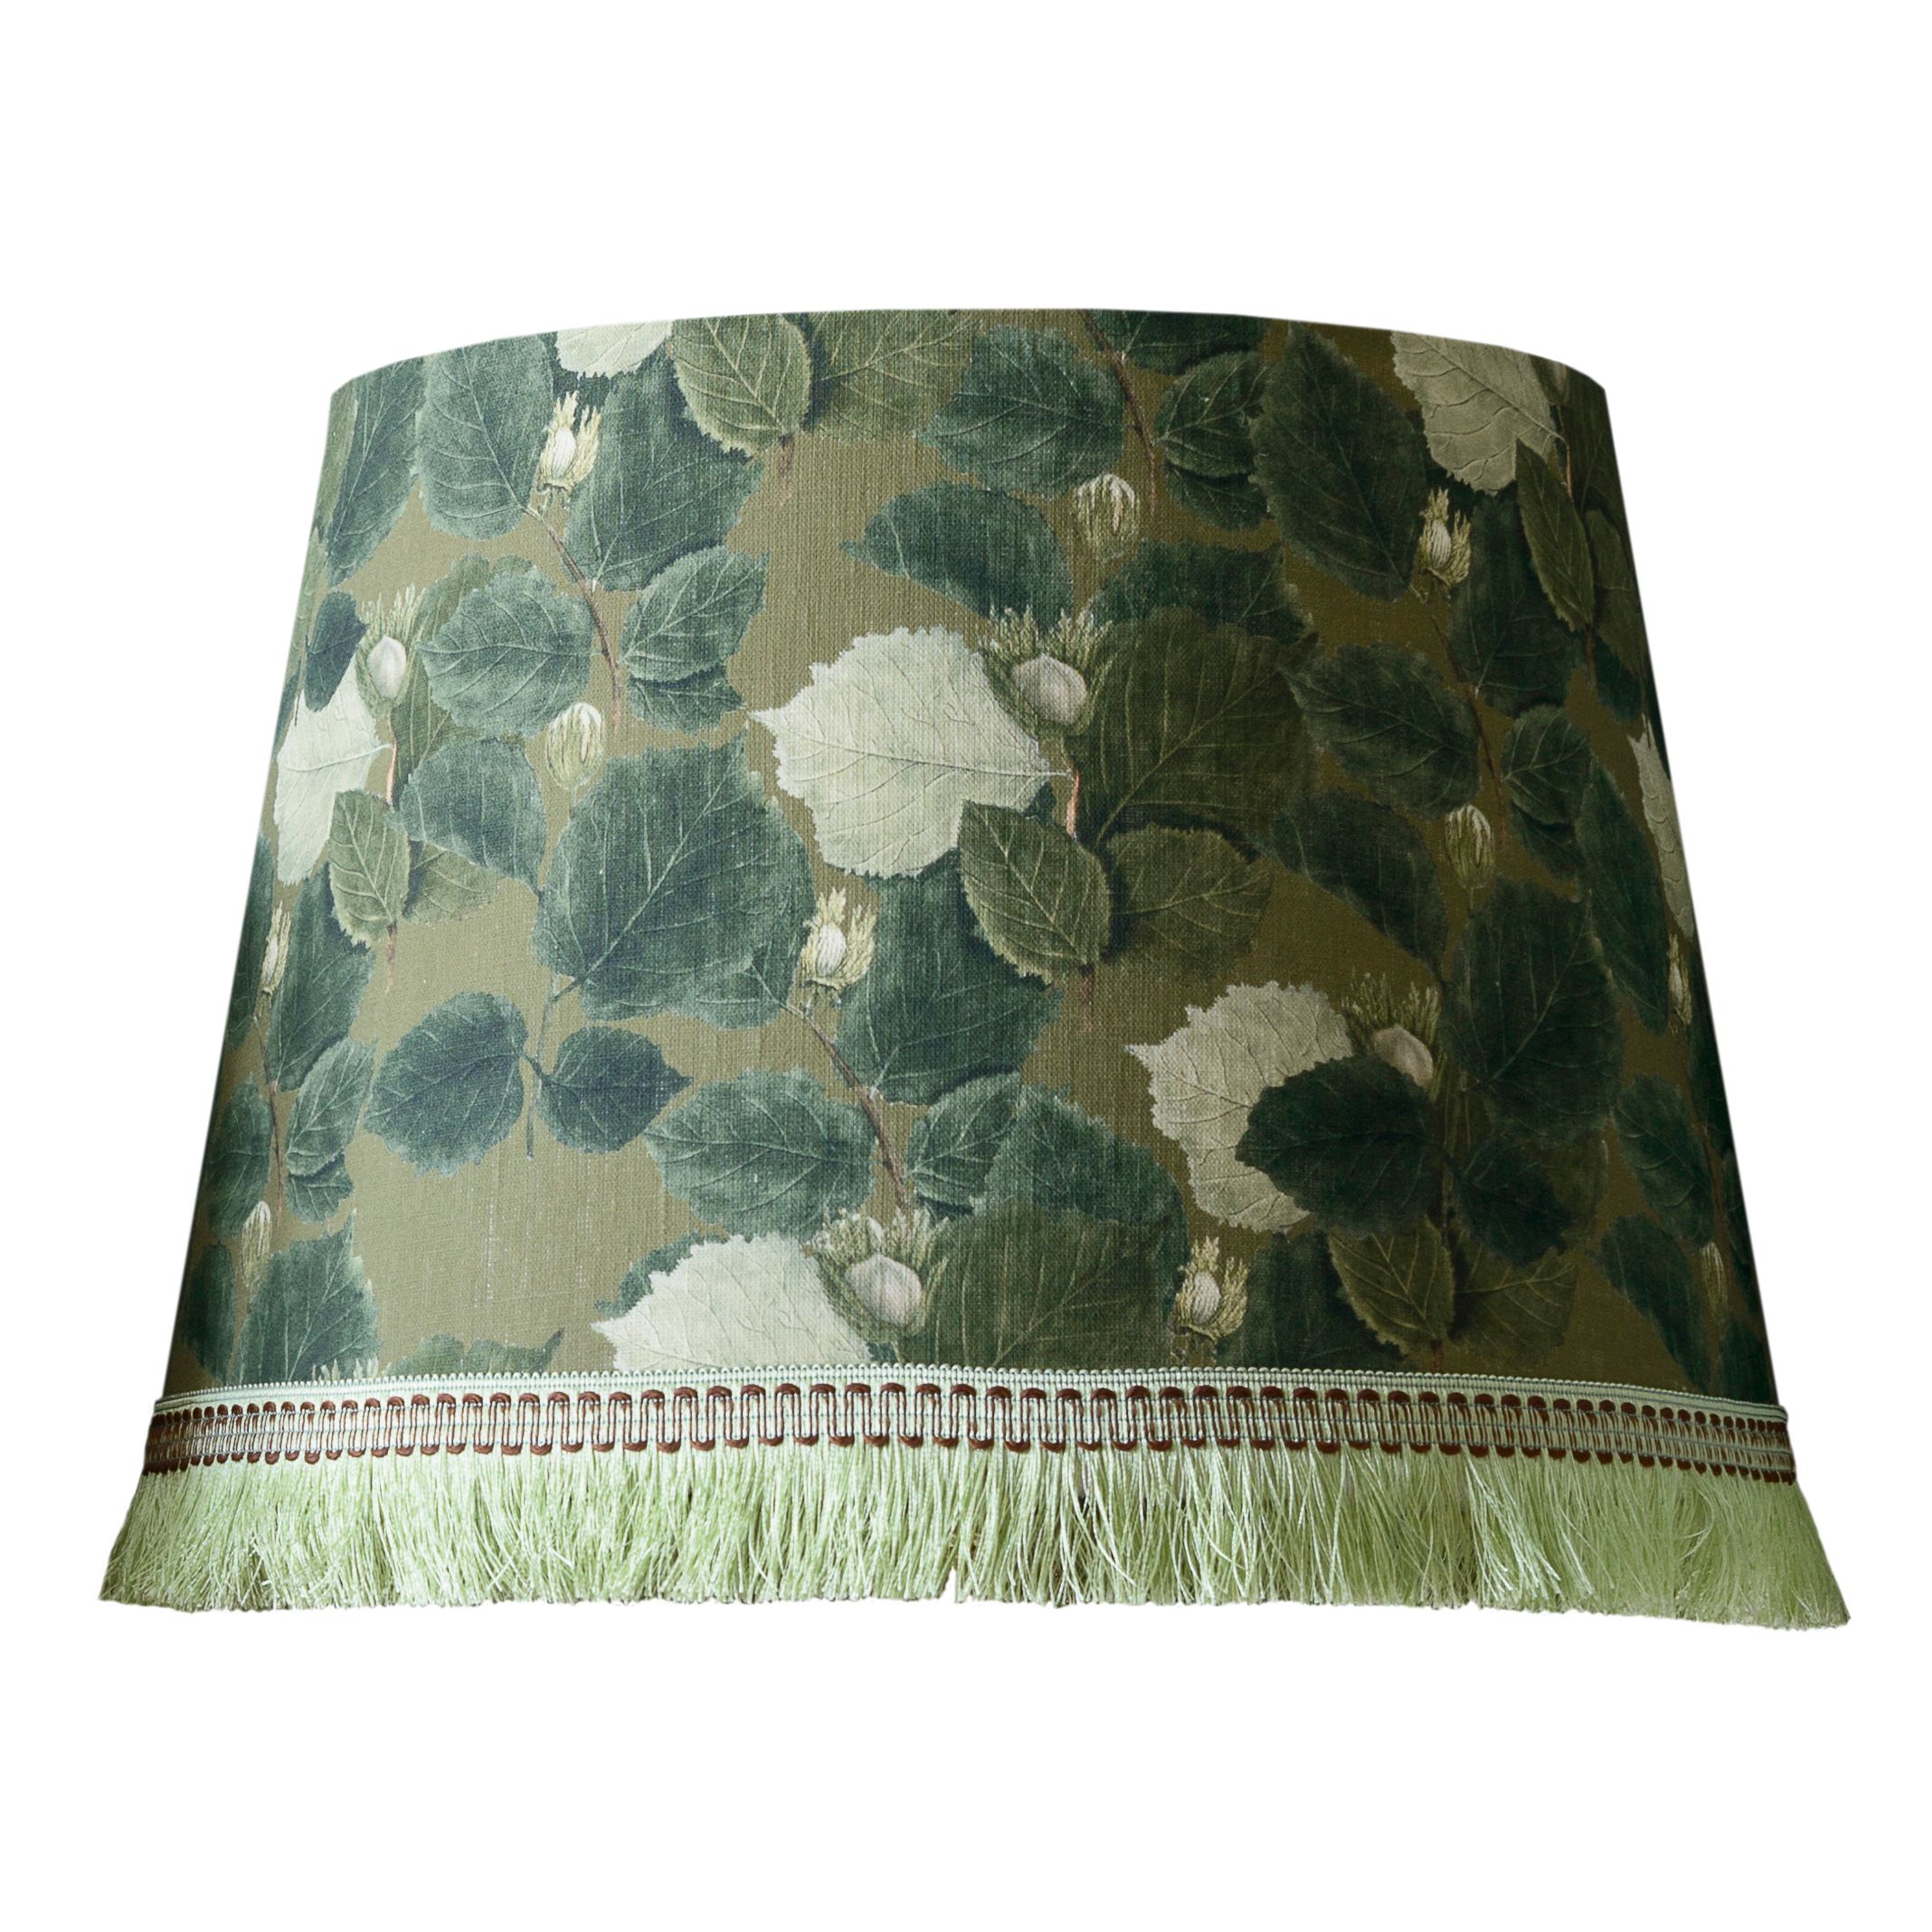 COUNTRY FLOWERS Lampshade 25cm x 35cm x Height 25cm